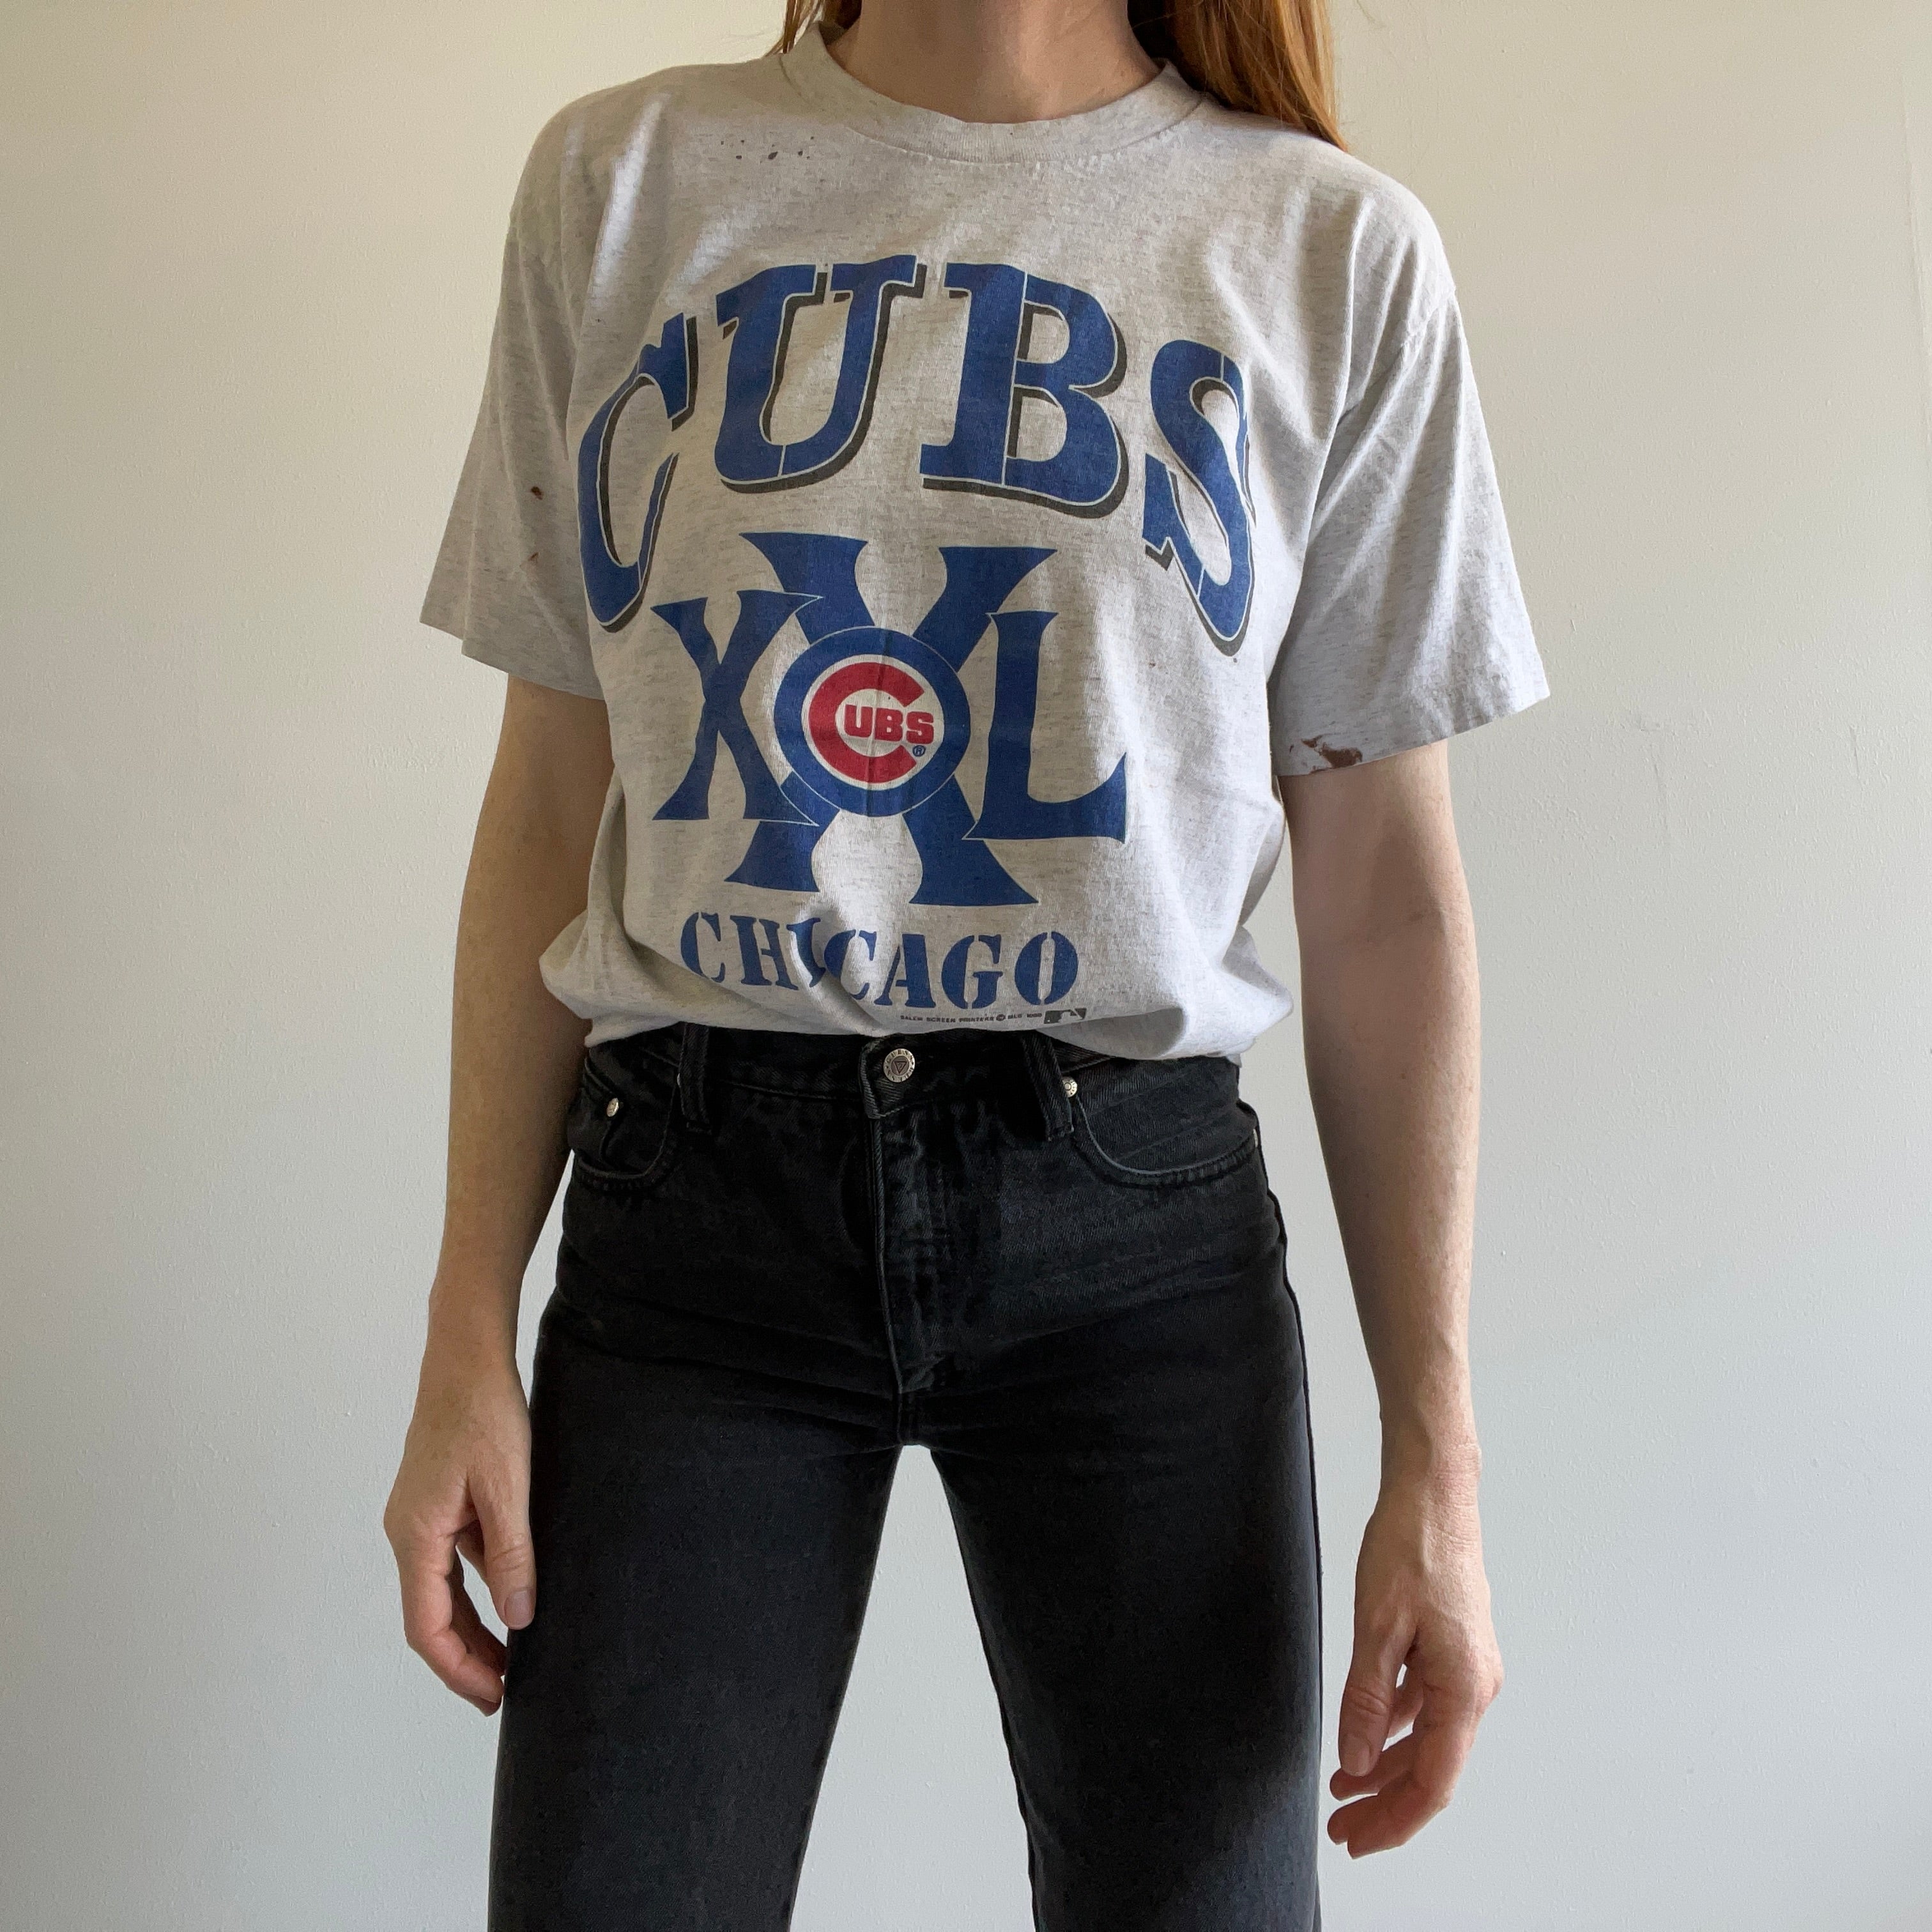 1990 Chicago Cubs T-Shirt !!!! – Red Vintage Co